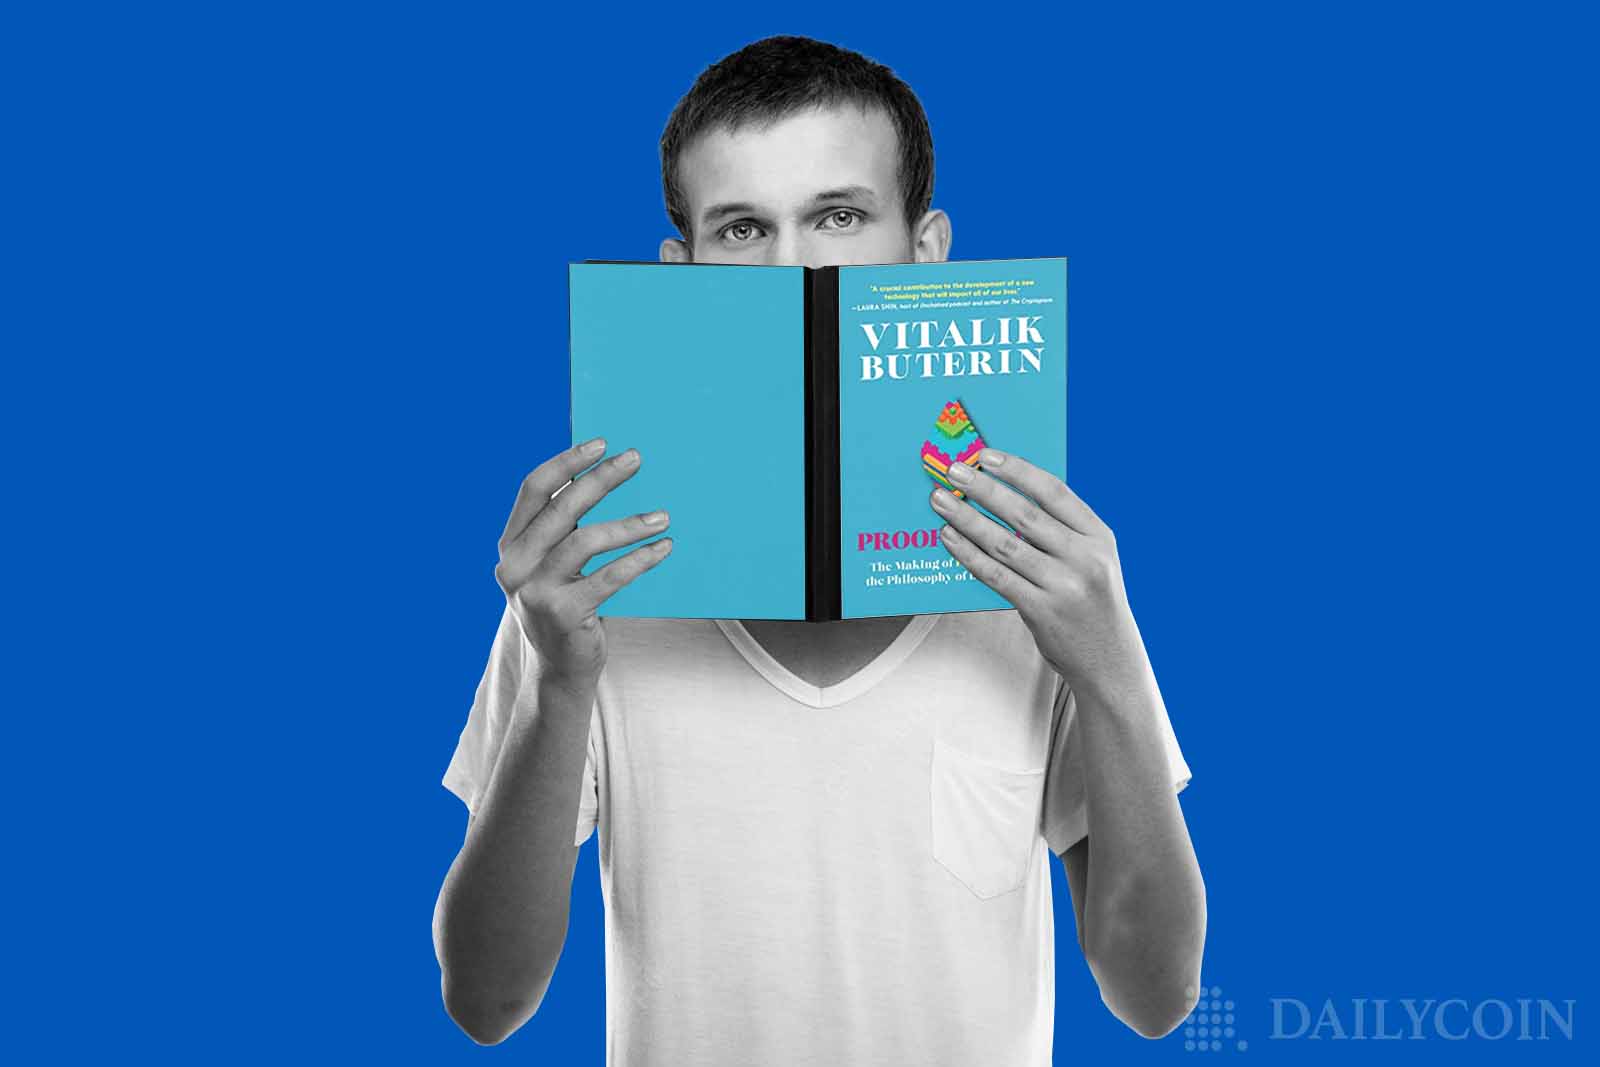 Vitalik Buterin Announces the Launch of His "Proof-of-Stake" Book Ahead of the Merge